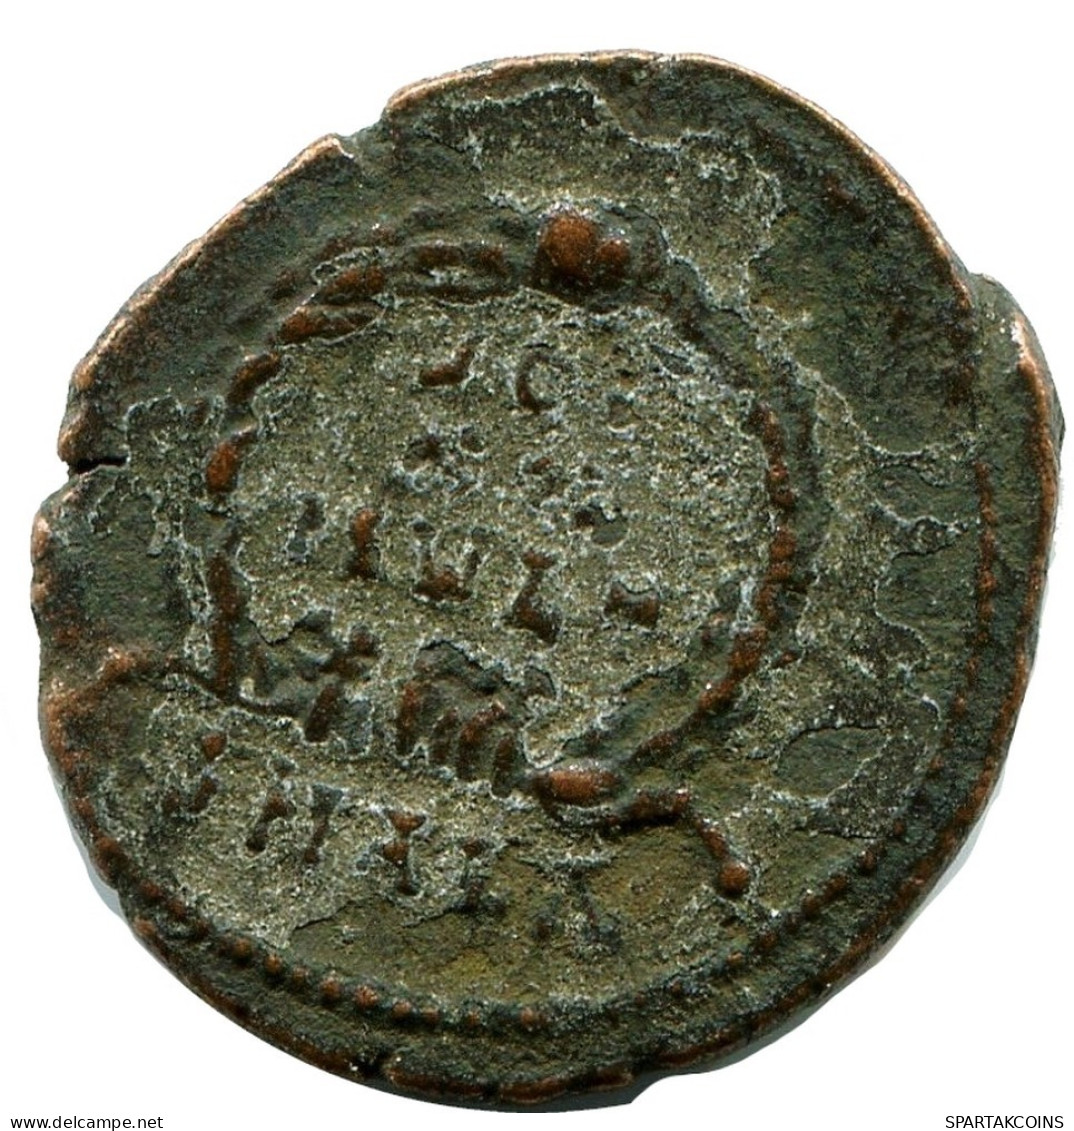 CONSTANS MINTED IN ALEKSANDRIA FOUND IN IHNASYAH HOARD EGYPT #ANC11422.14.E.A - The Christian Empire (307 AD To 363 AD)